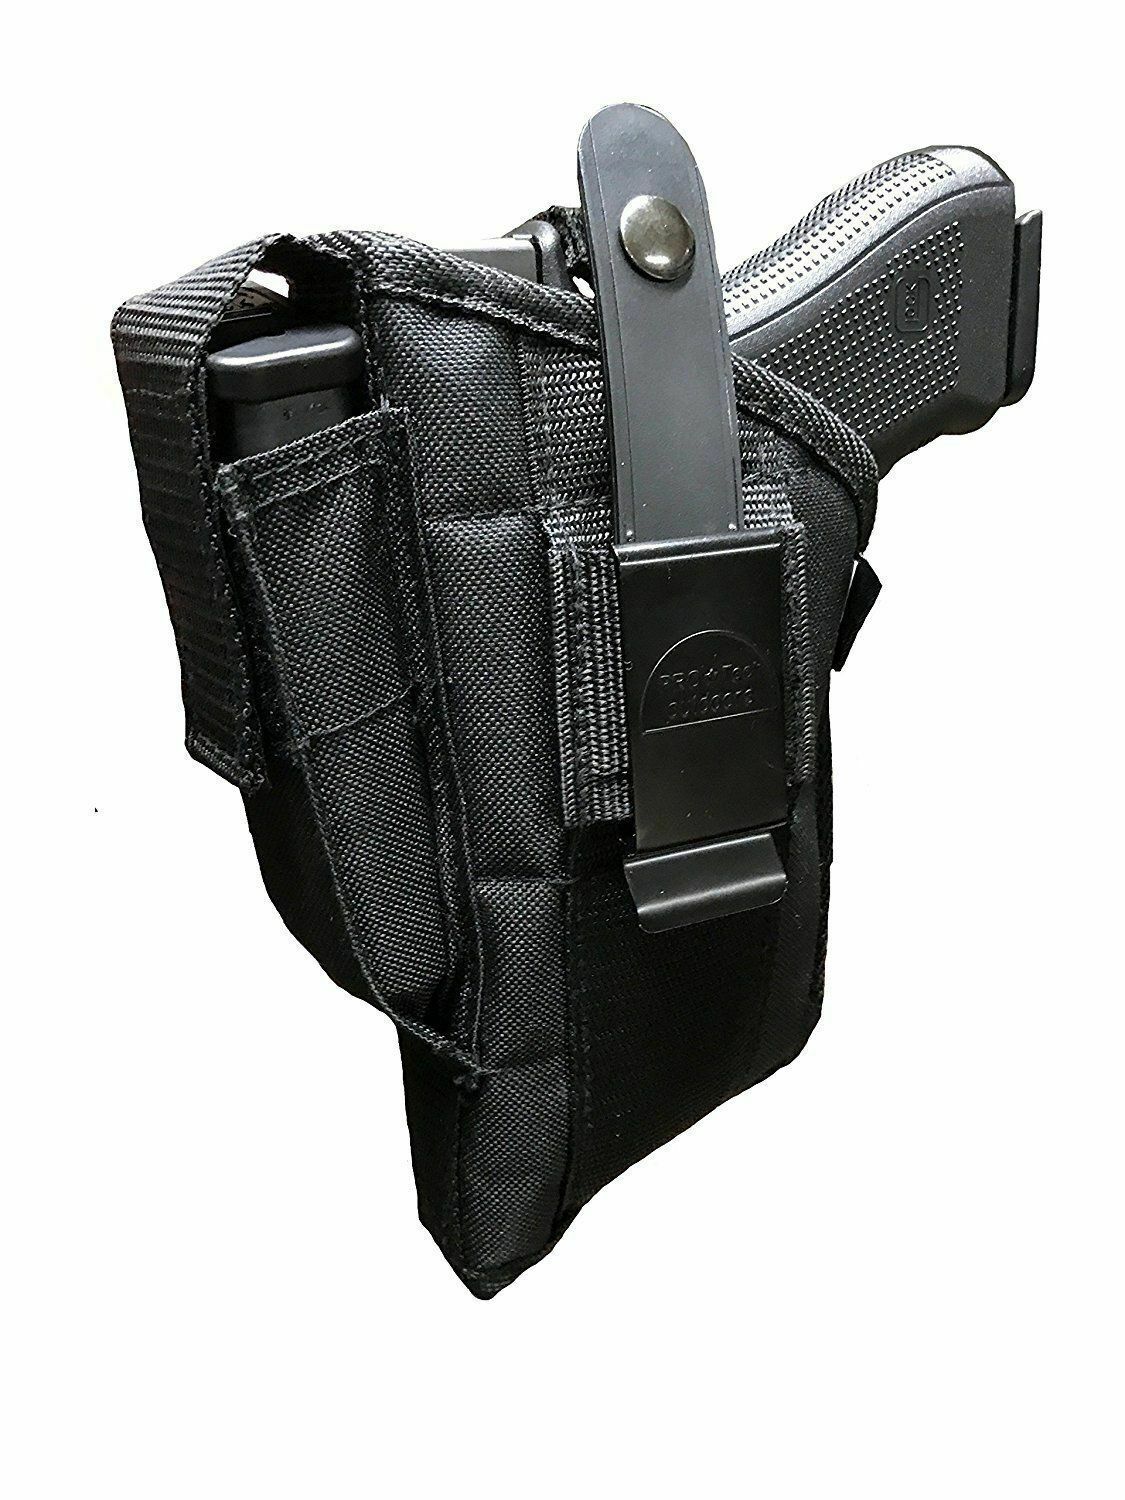 NEW Pro-tech Gun holster With Magazine Pouch For Colt 1911 With Tactical Light - $24.95